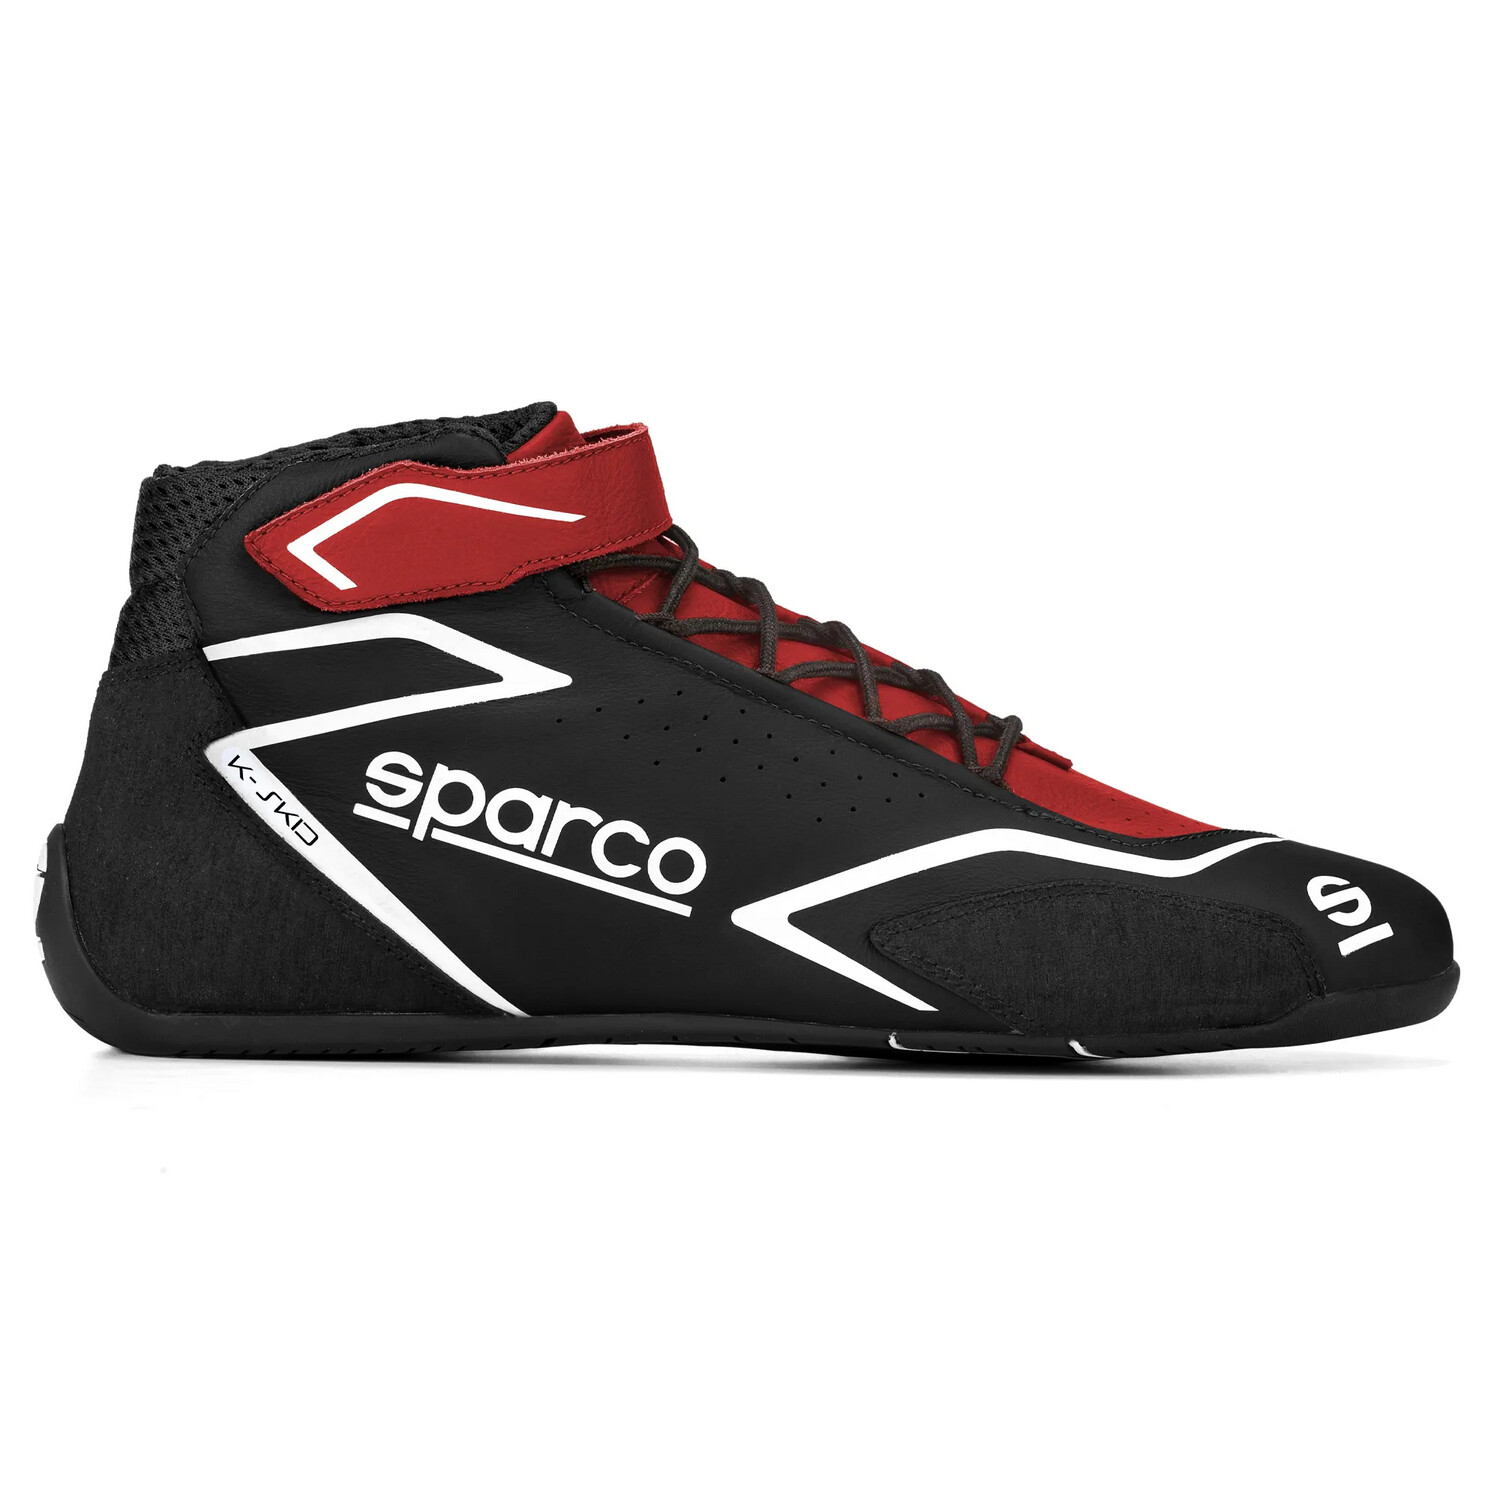 Sparco K-Skid shoes